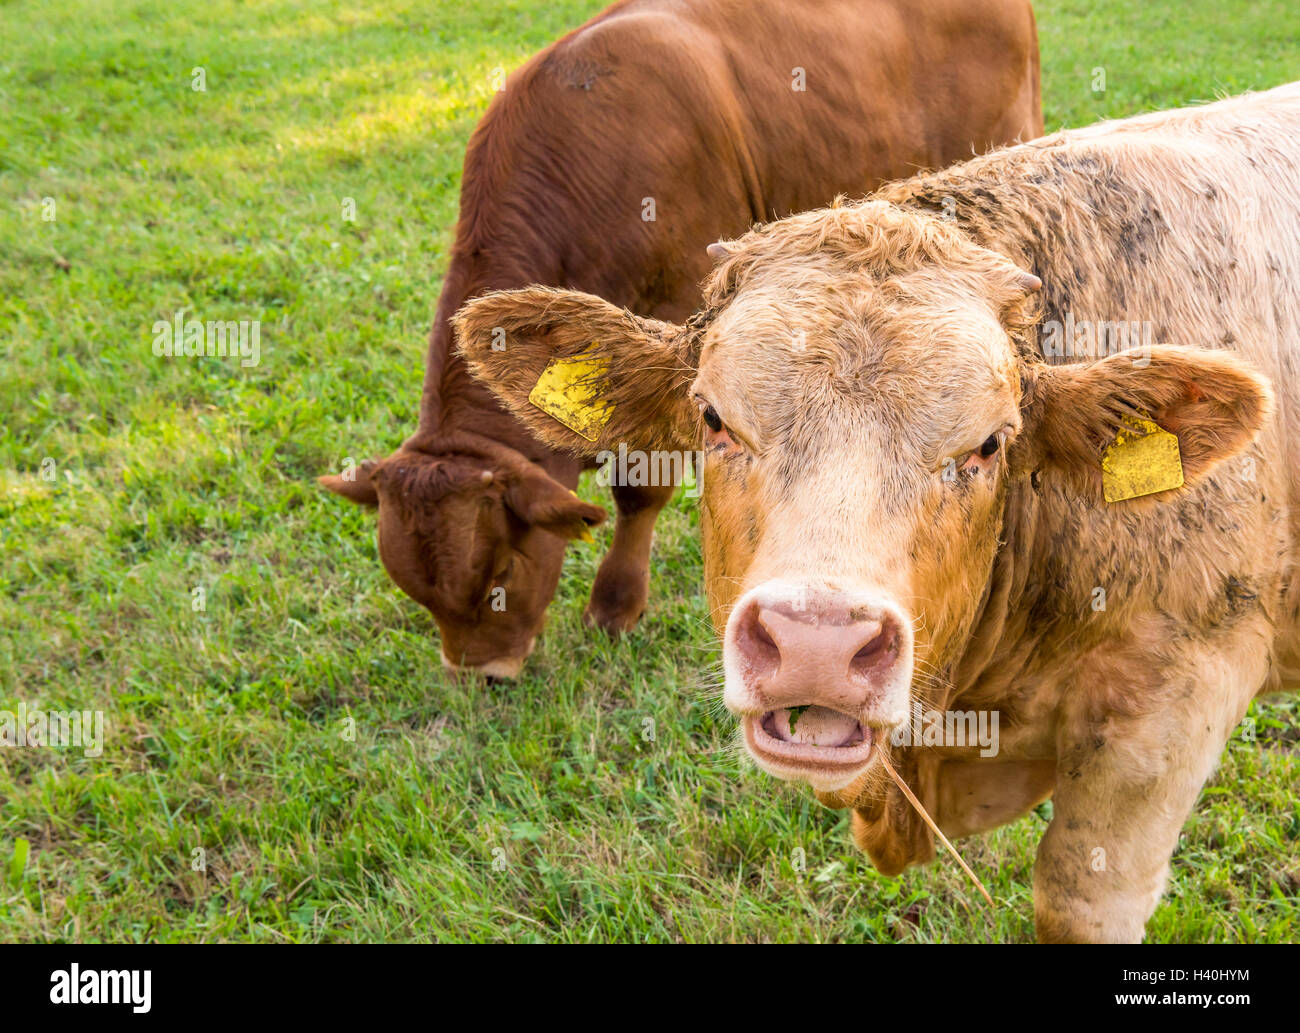 Young bull with open mouth Stock Photo